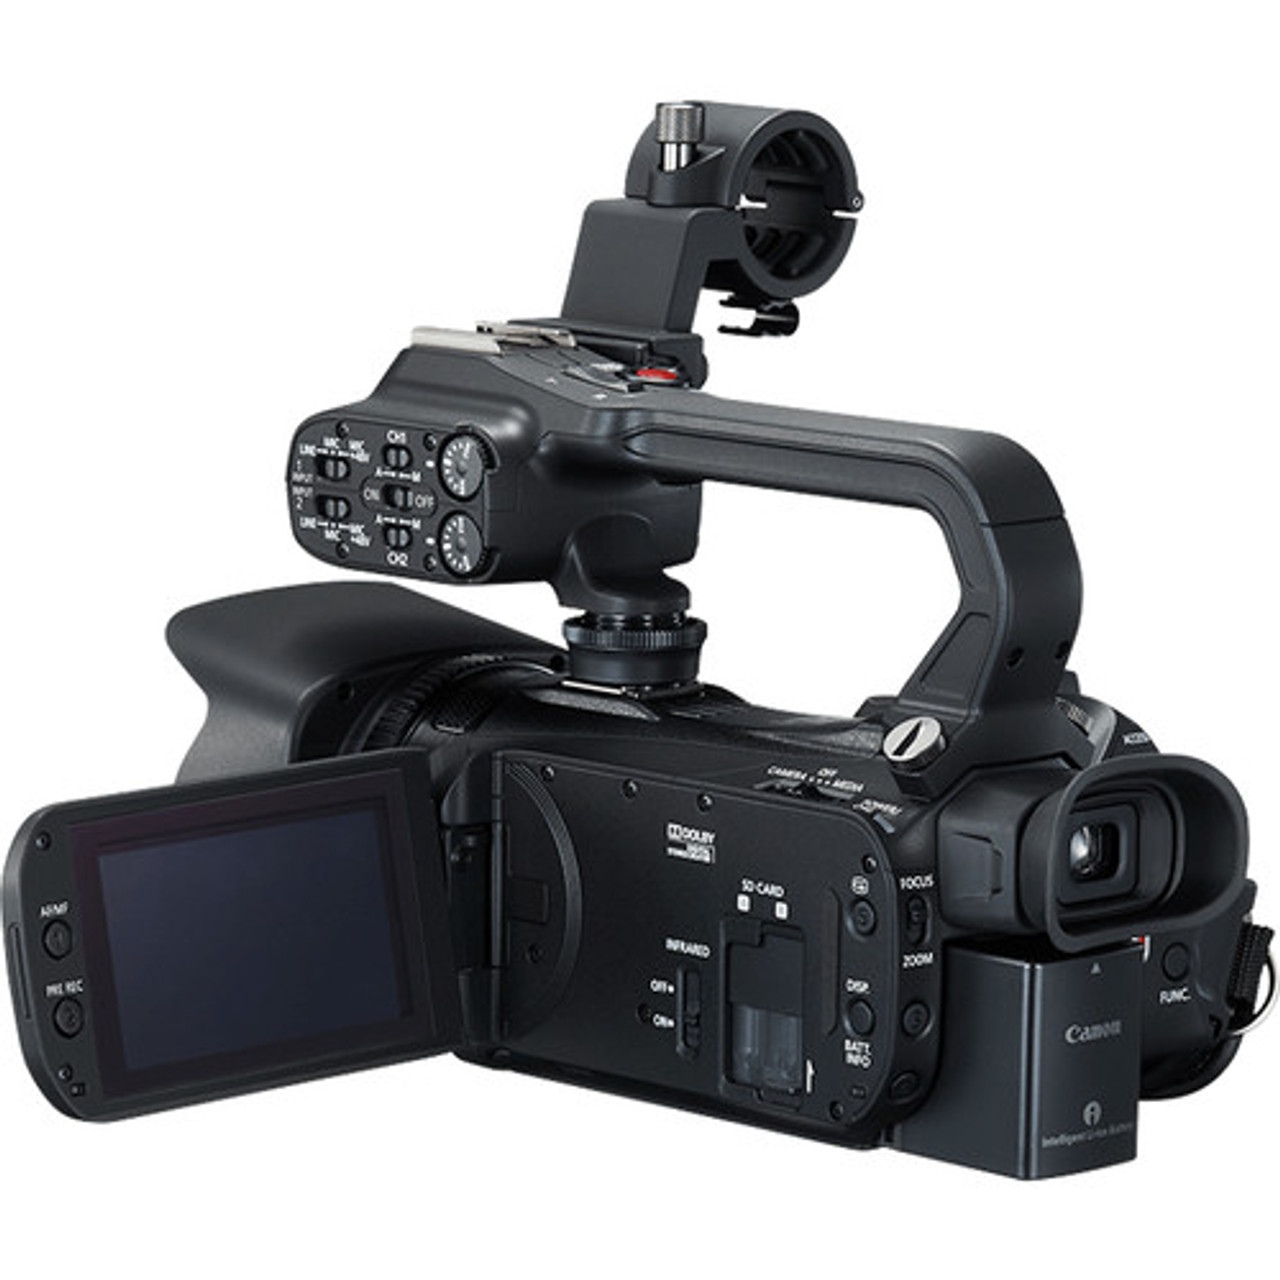 oogsten Mus rol Canon XA15 Compact Full HD Camcorder with SDI, HDMI, and Composite Output